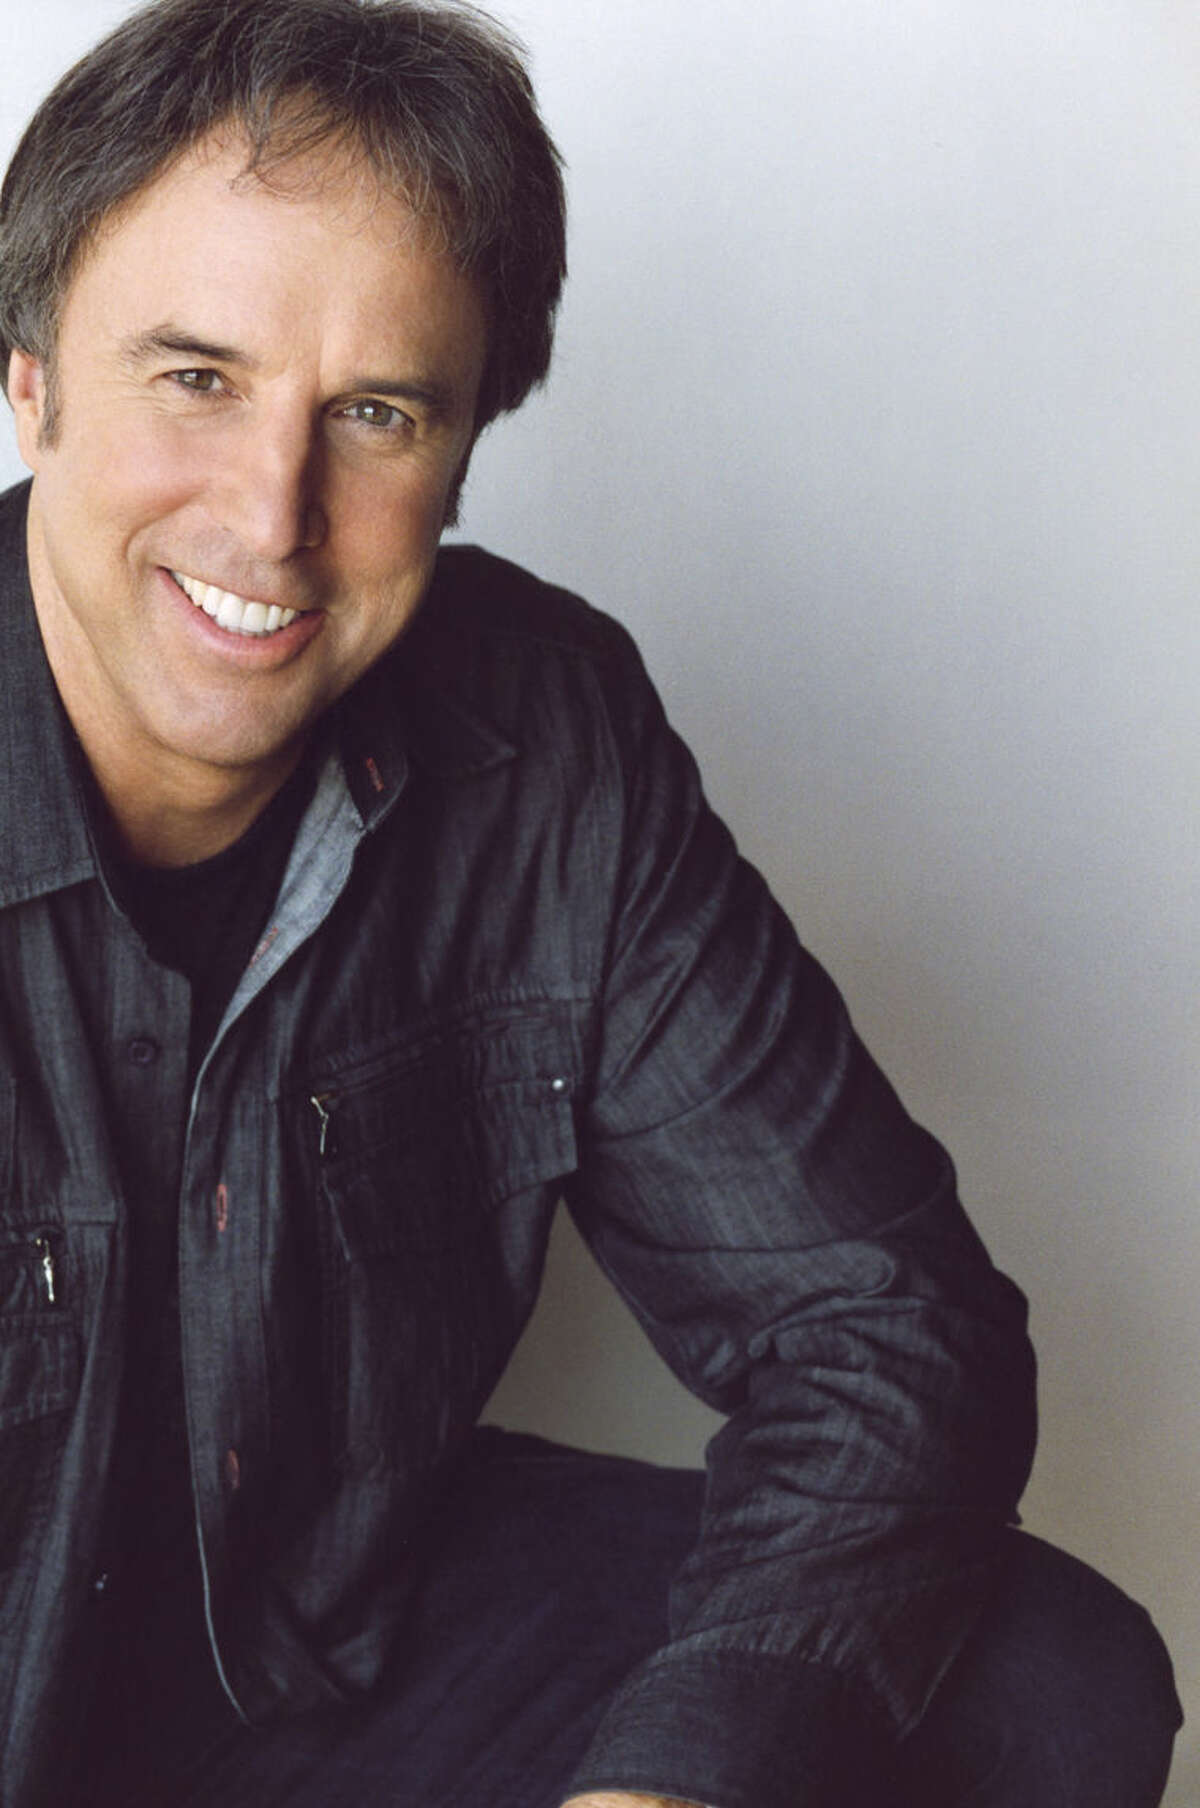 Kevin Nealon brings his comedy to the State Theatre in Bay City at 7 p.m. Friday, May 20.